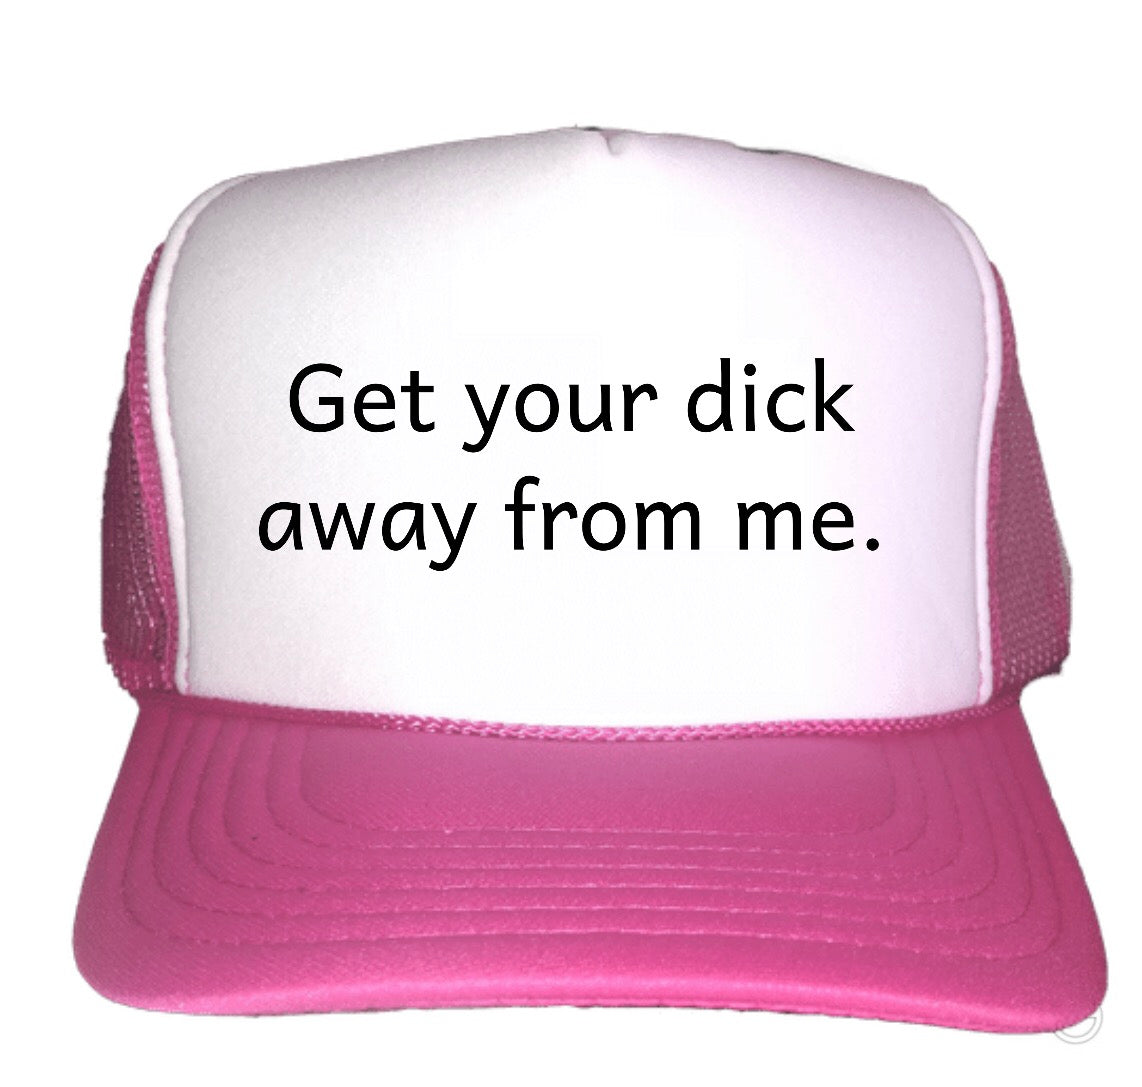 Get Your Dick Away From Me Trucker Hats